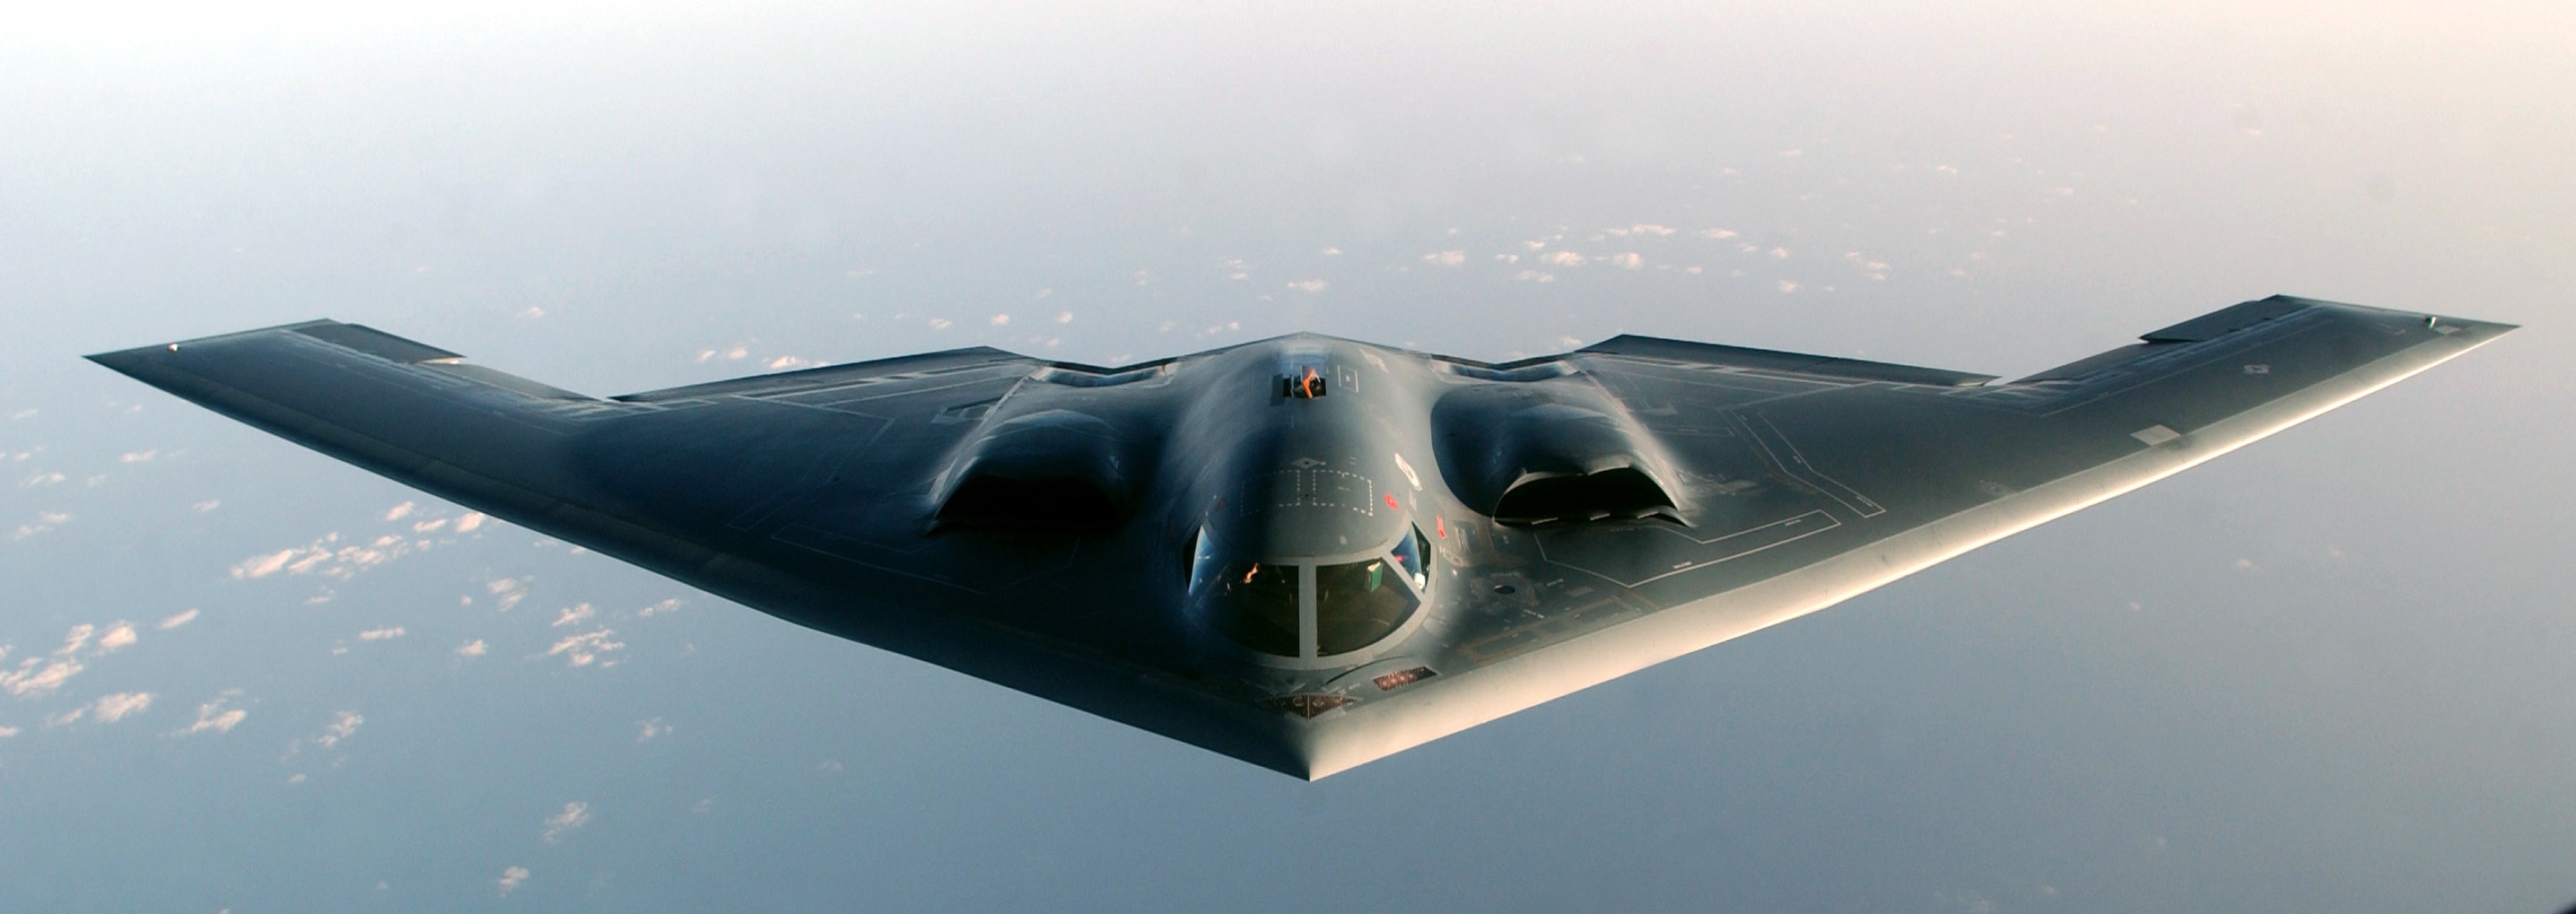 Images of Stealth Aircraft | 2871x1019